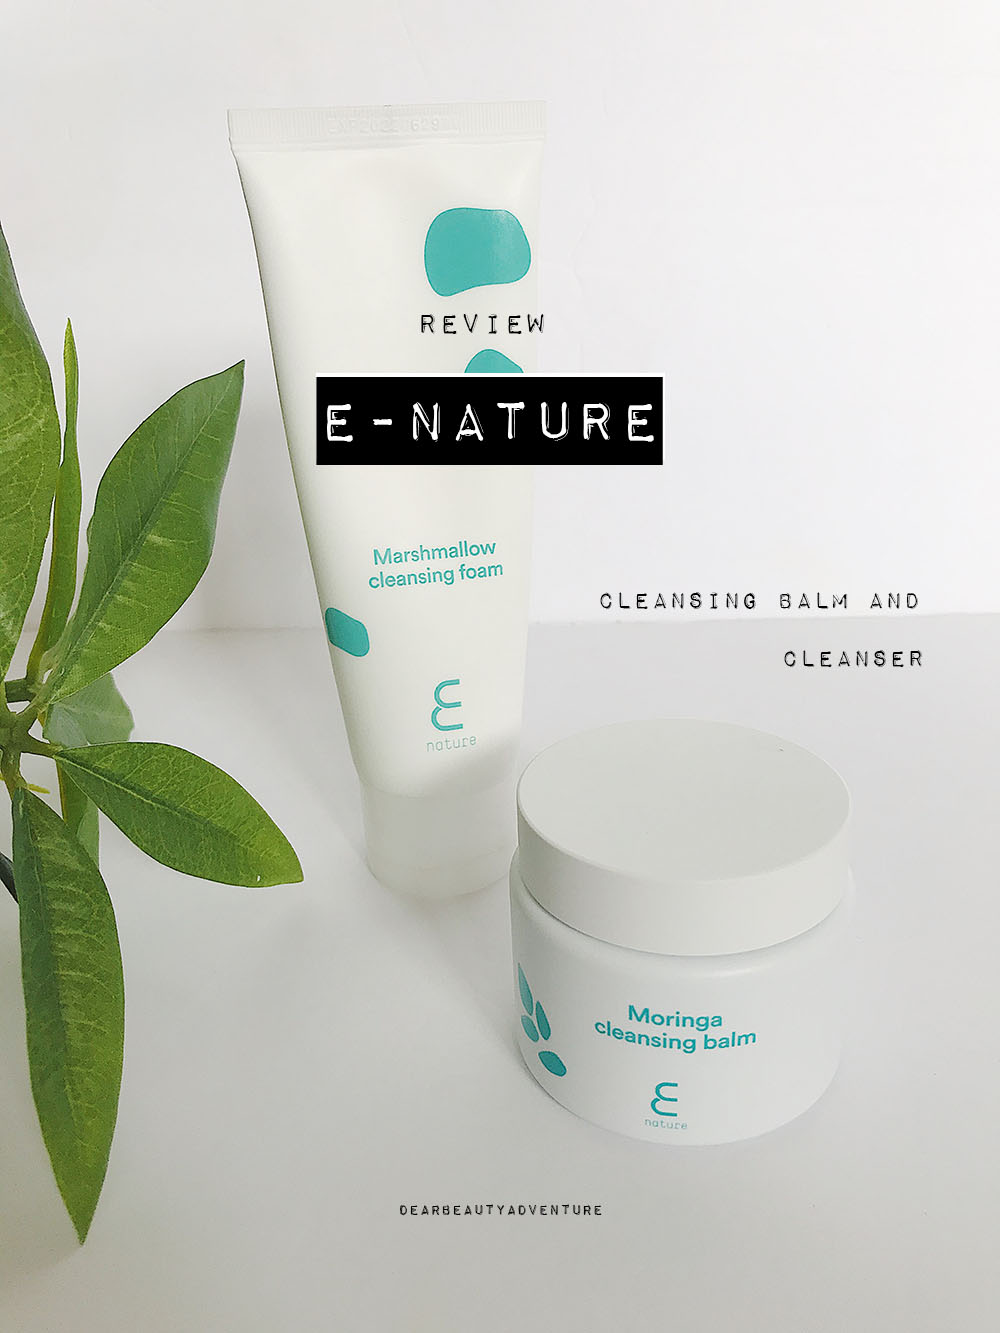 e nature review cleansing balm and marshmallow cleanser